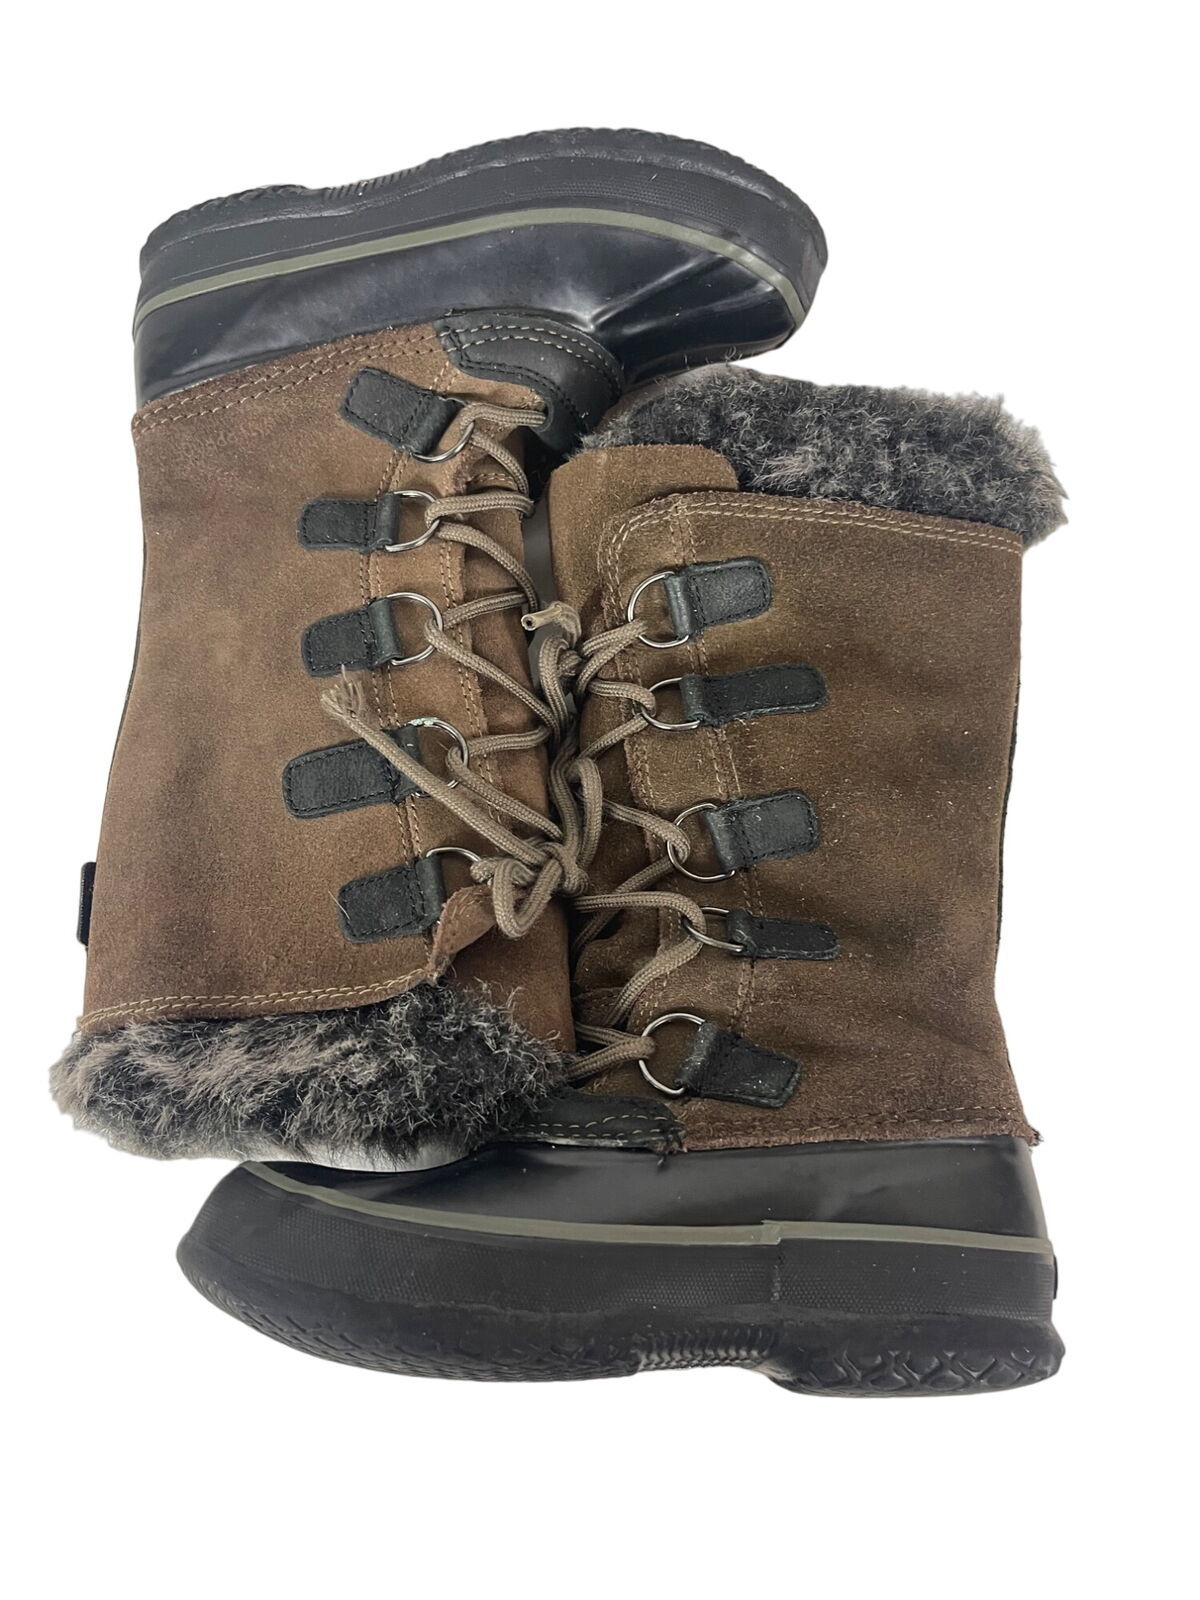 Kamik Solitude Jr Snow Boots Girls Size 1 Youth Brown Suede Leather FAIR - $21.60